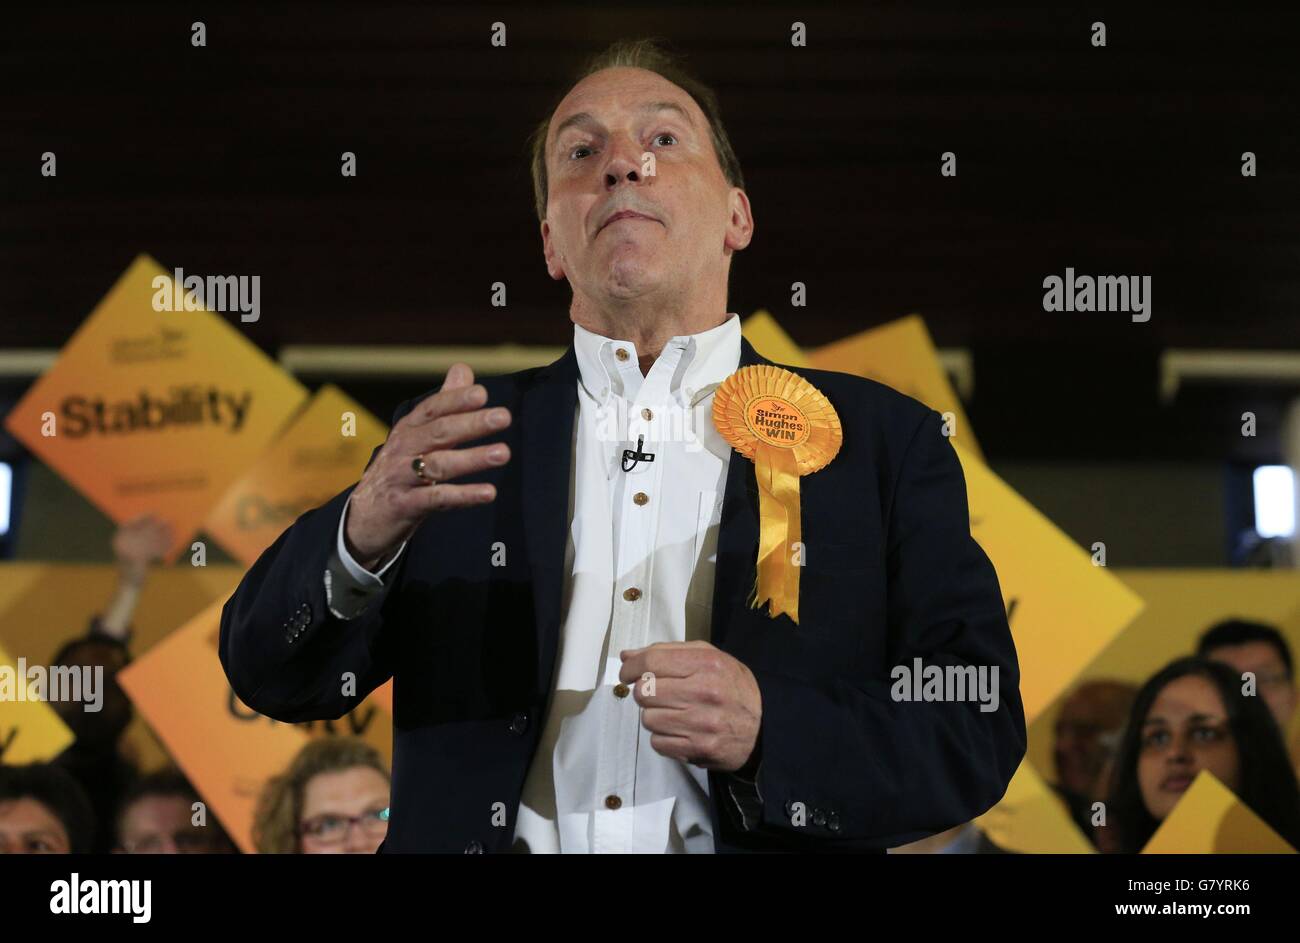 Liberal Democrat Party parliamentary candidate for Bermondsey and Old Southwark Simon Hughes speaks to supporters at the Rennie and Manor Estates Tenants Association Hall in Bermondsey, London. Stock Photo